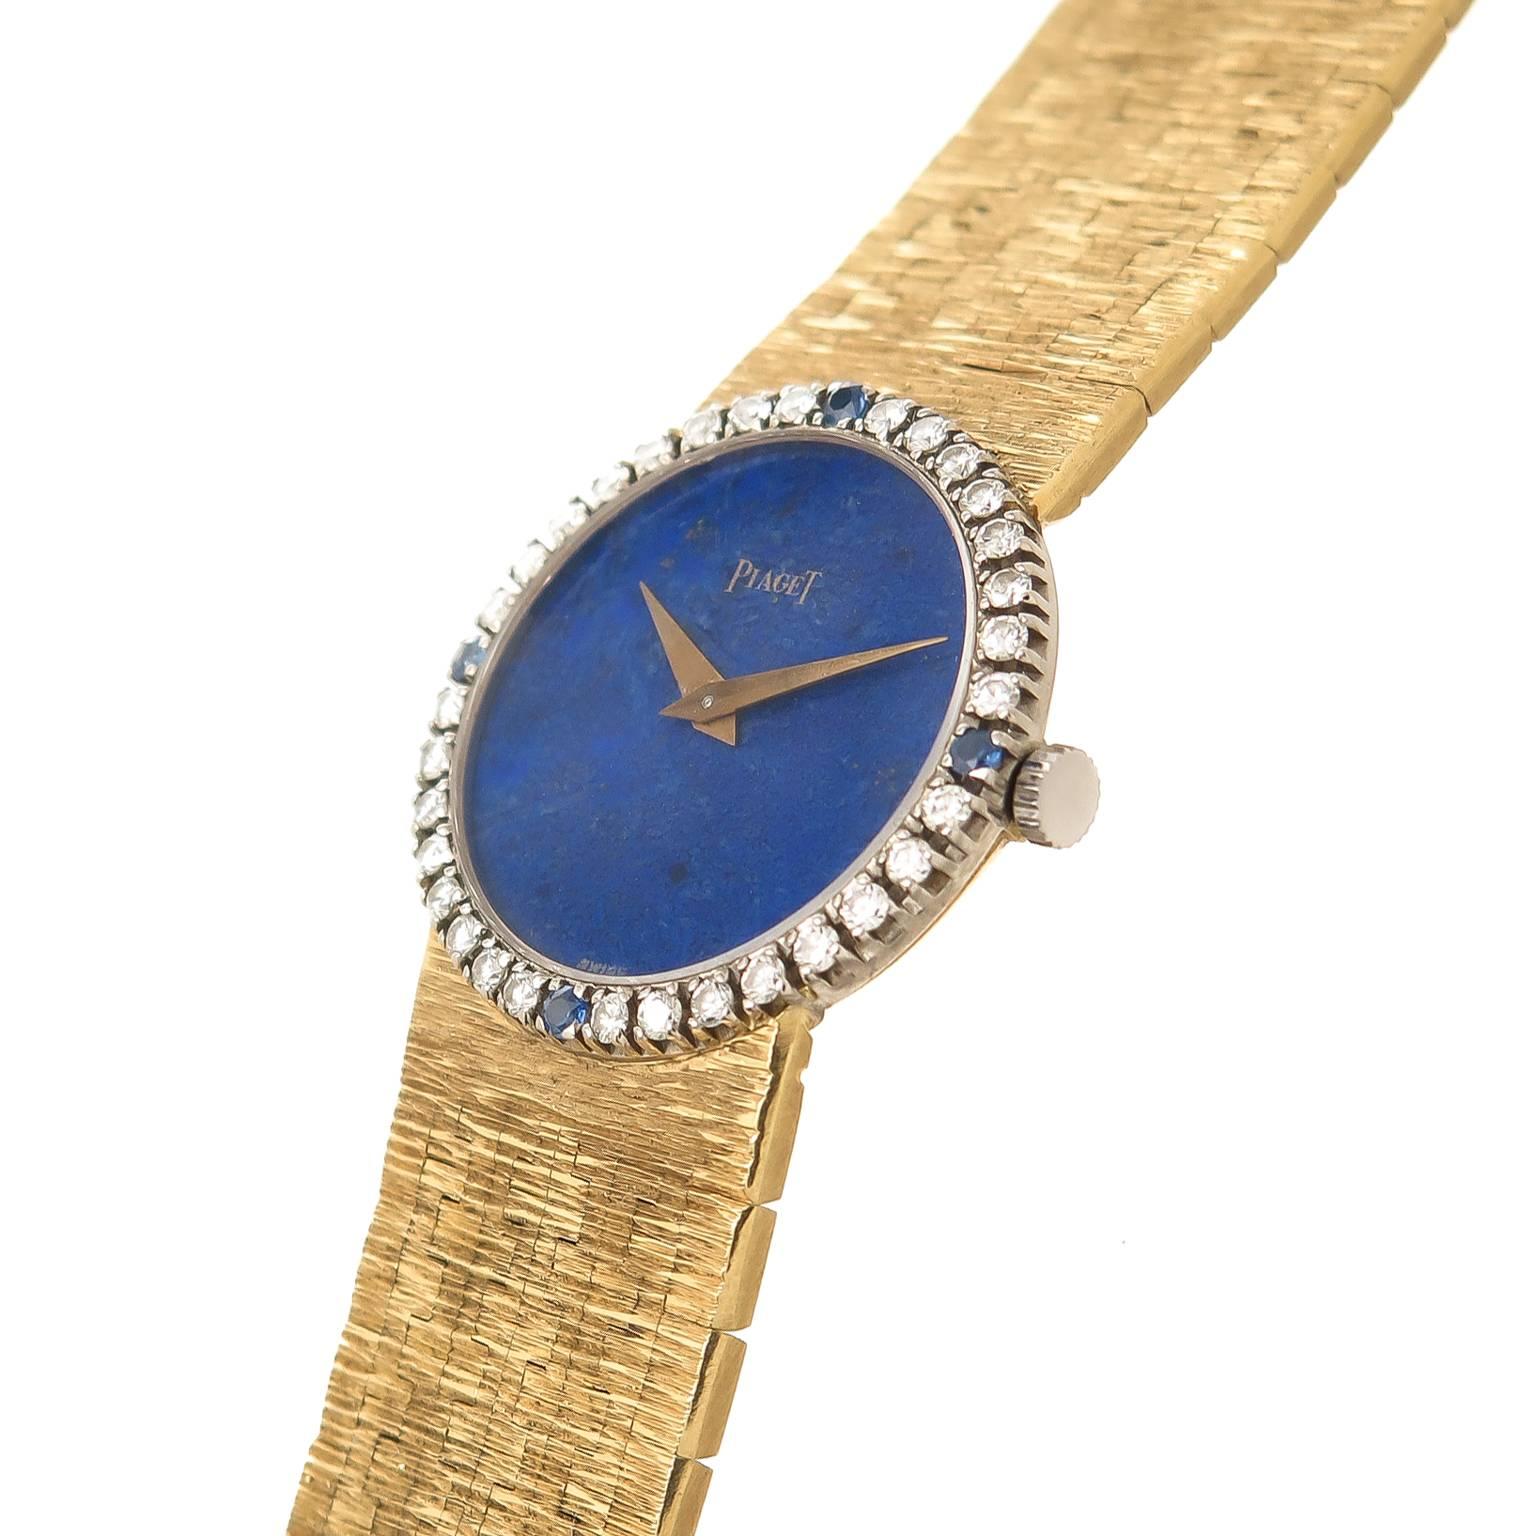 Circa 1970s Piaget Ladies Wrist Watch, 24 MM 18K yellow Gold Water resistant case with Diamond and Sapphire Bezel, 17 jewel manual wind Movement, Lapis Lazuli Dial with Gold Hands. 5/8 inch wide signed Piaget 18k yellow Gold bracelet. Total watch